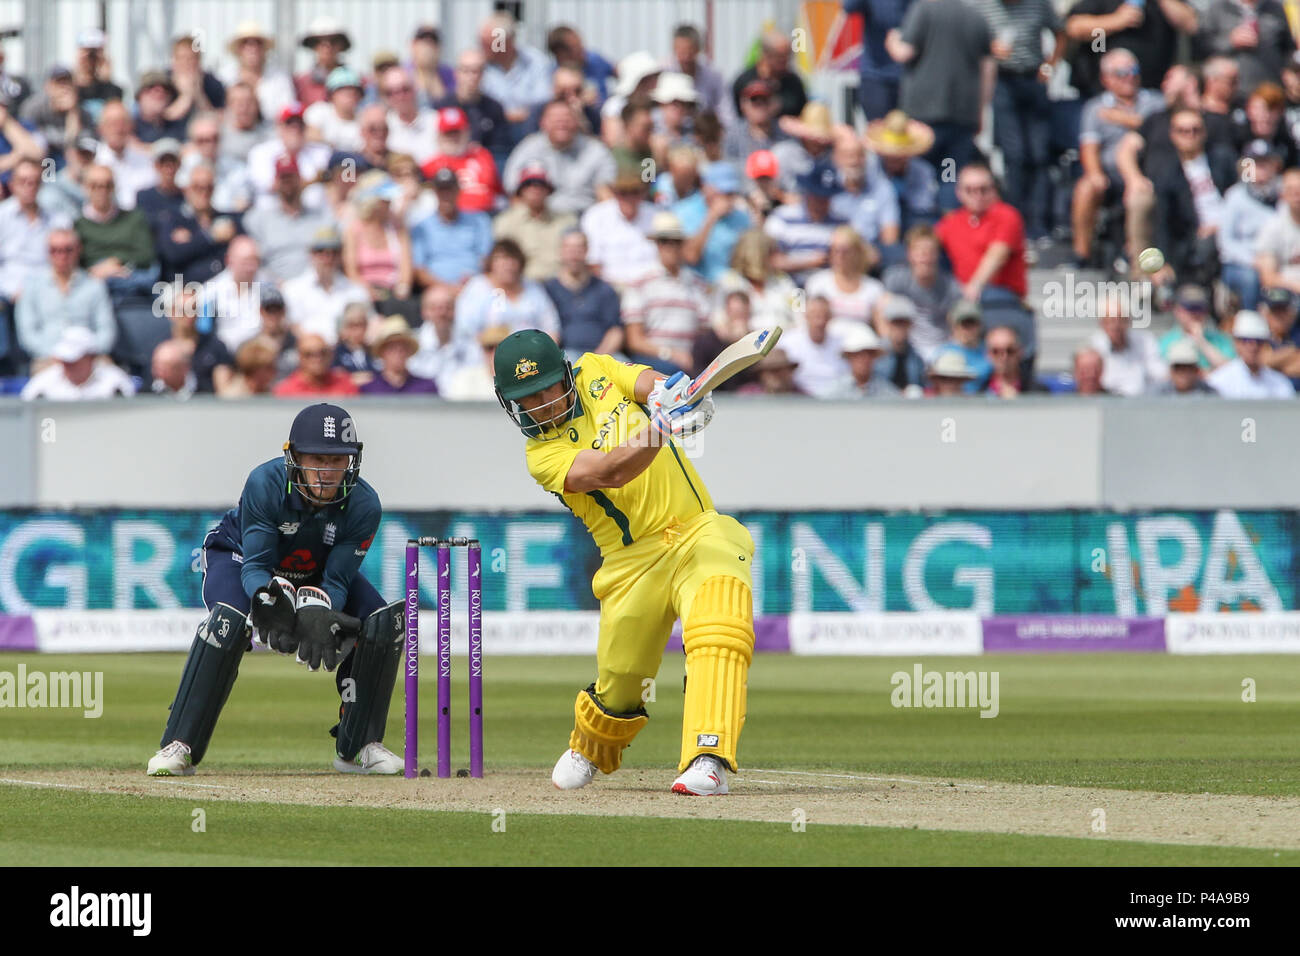 Thursday 21st June 2018 , Emerald Emirates Riverside,Chester-le-Street, 4th ODI Royal London One-Day Series England v Australia;Aaron Finch of Australia hits a six (6) the first for the game Stock Photo